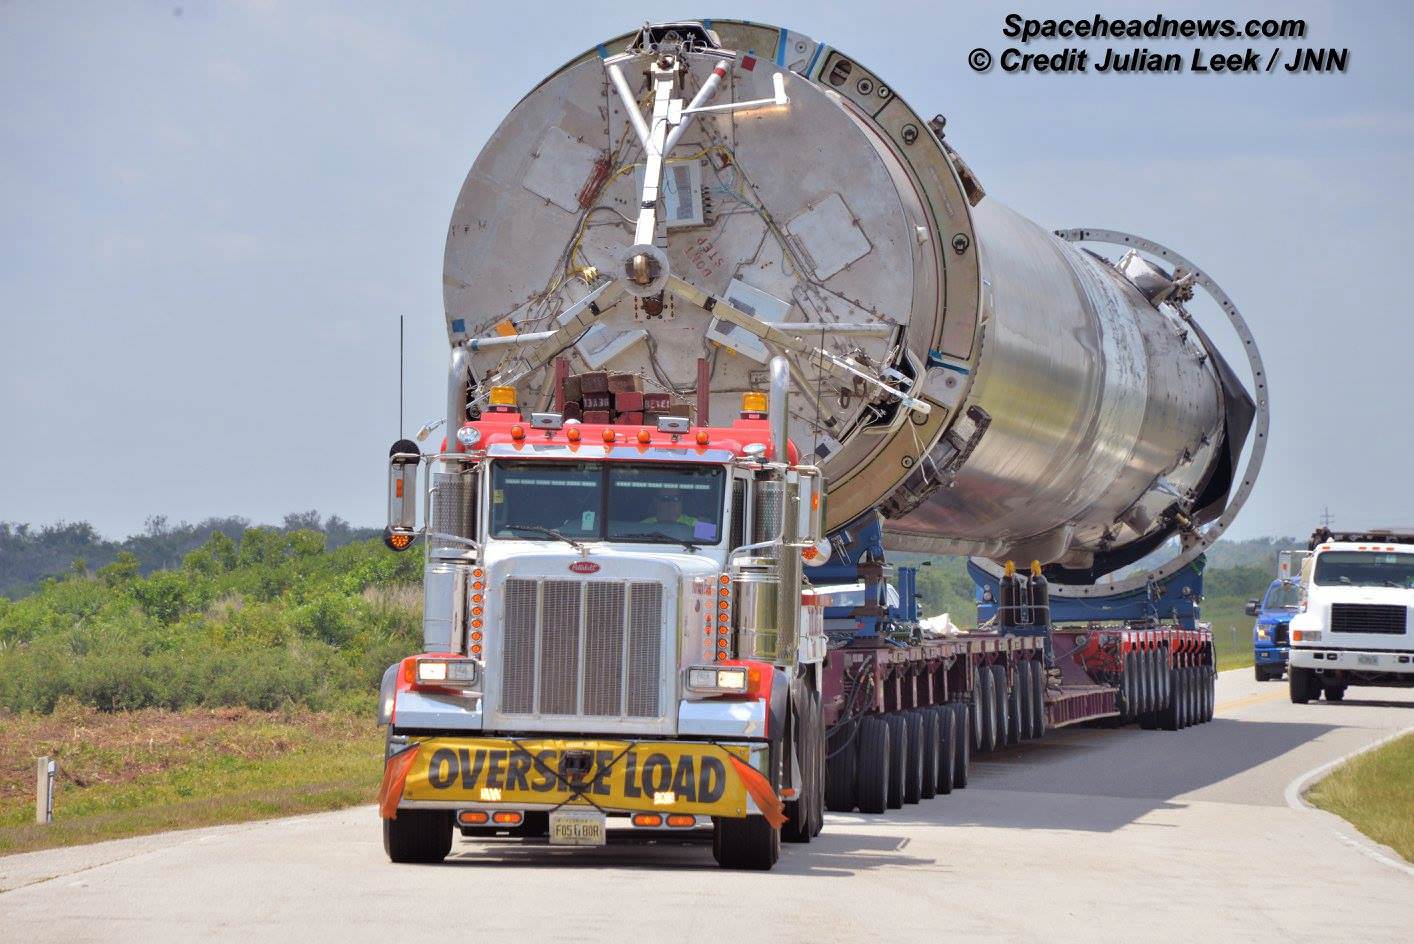 First stage booster with landing legs removed from SpaceX JCSAT-14 launch was transported horizontally to SpaceX hangar at pad 39A at the Kennedy Space Center, Florida on May 16, 2016. Credit: Julian Leek